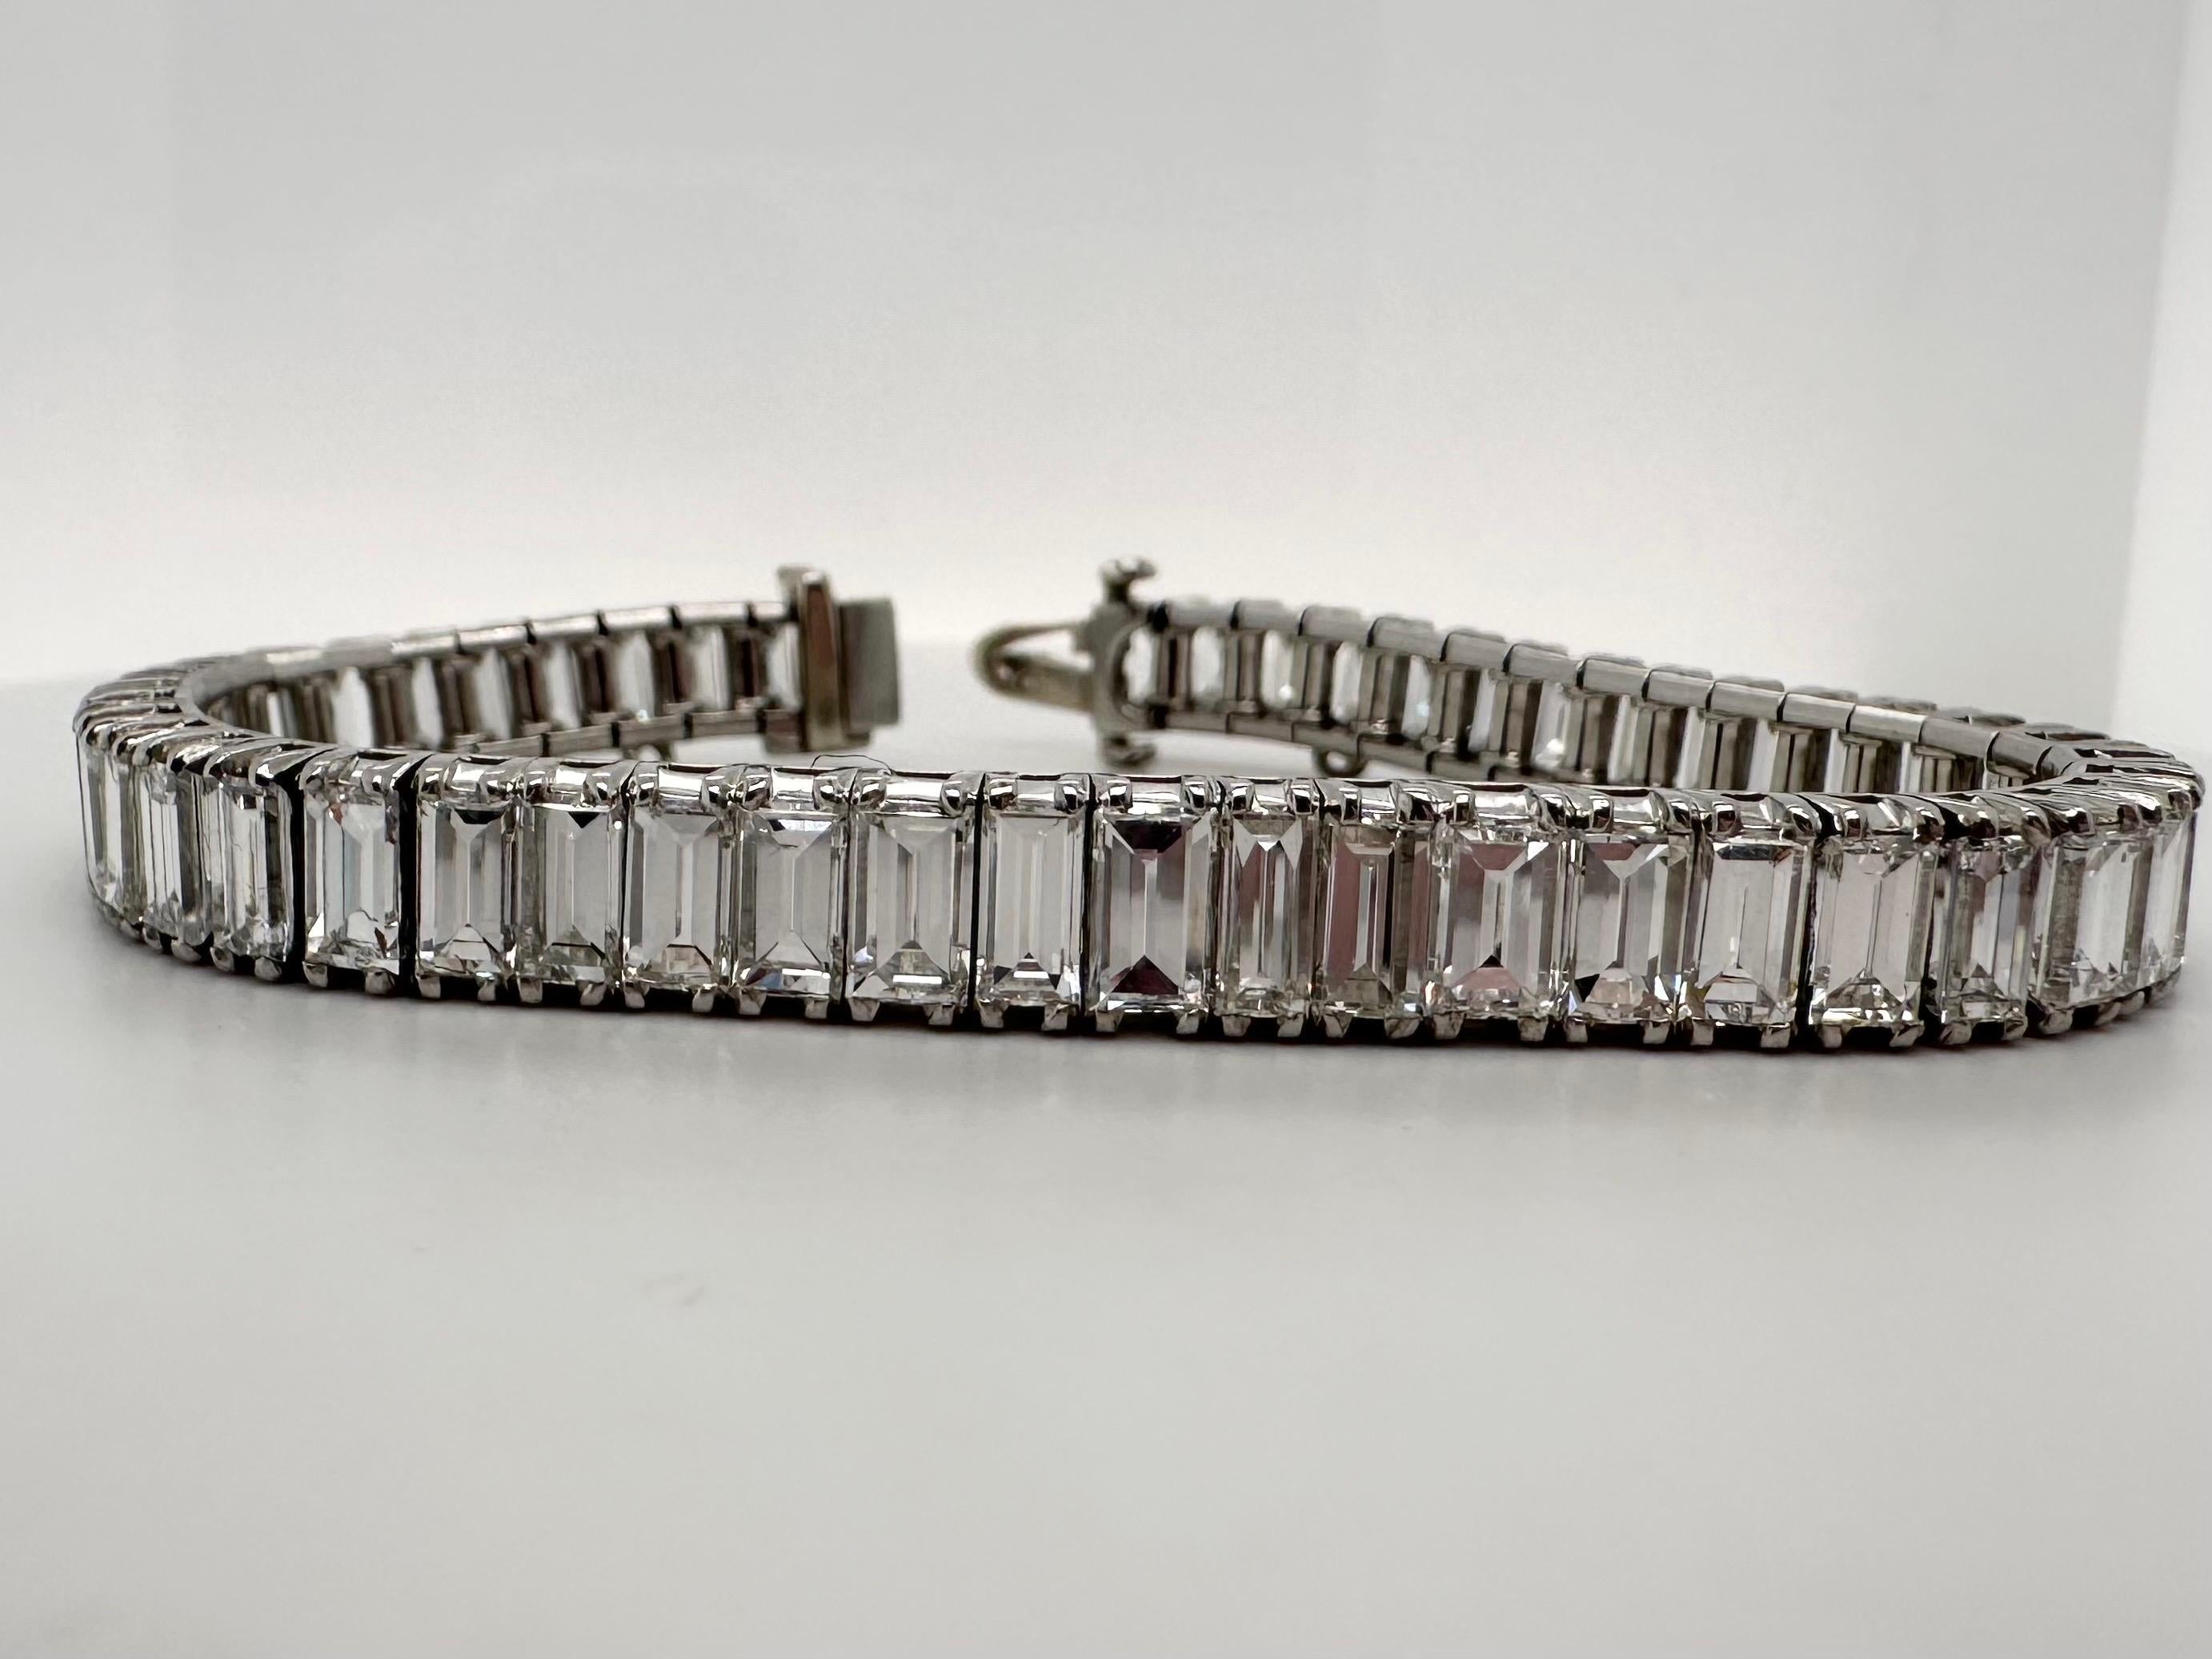 Exquisitine diamond tennis bracelet in 18KT white gold, made with 25 carats of natural fine diamonds, VS clarity and F color, some stones have GIA certificates. This piece is truly one of a kind and will be hard to find anywhere else! 


ABOUT US
We